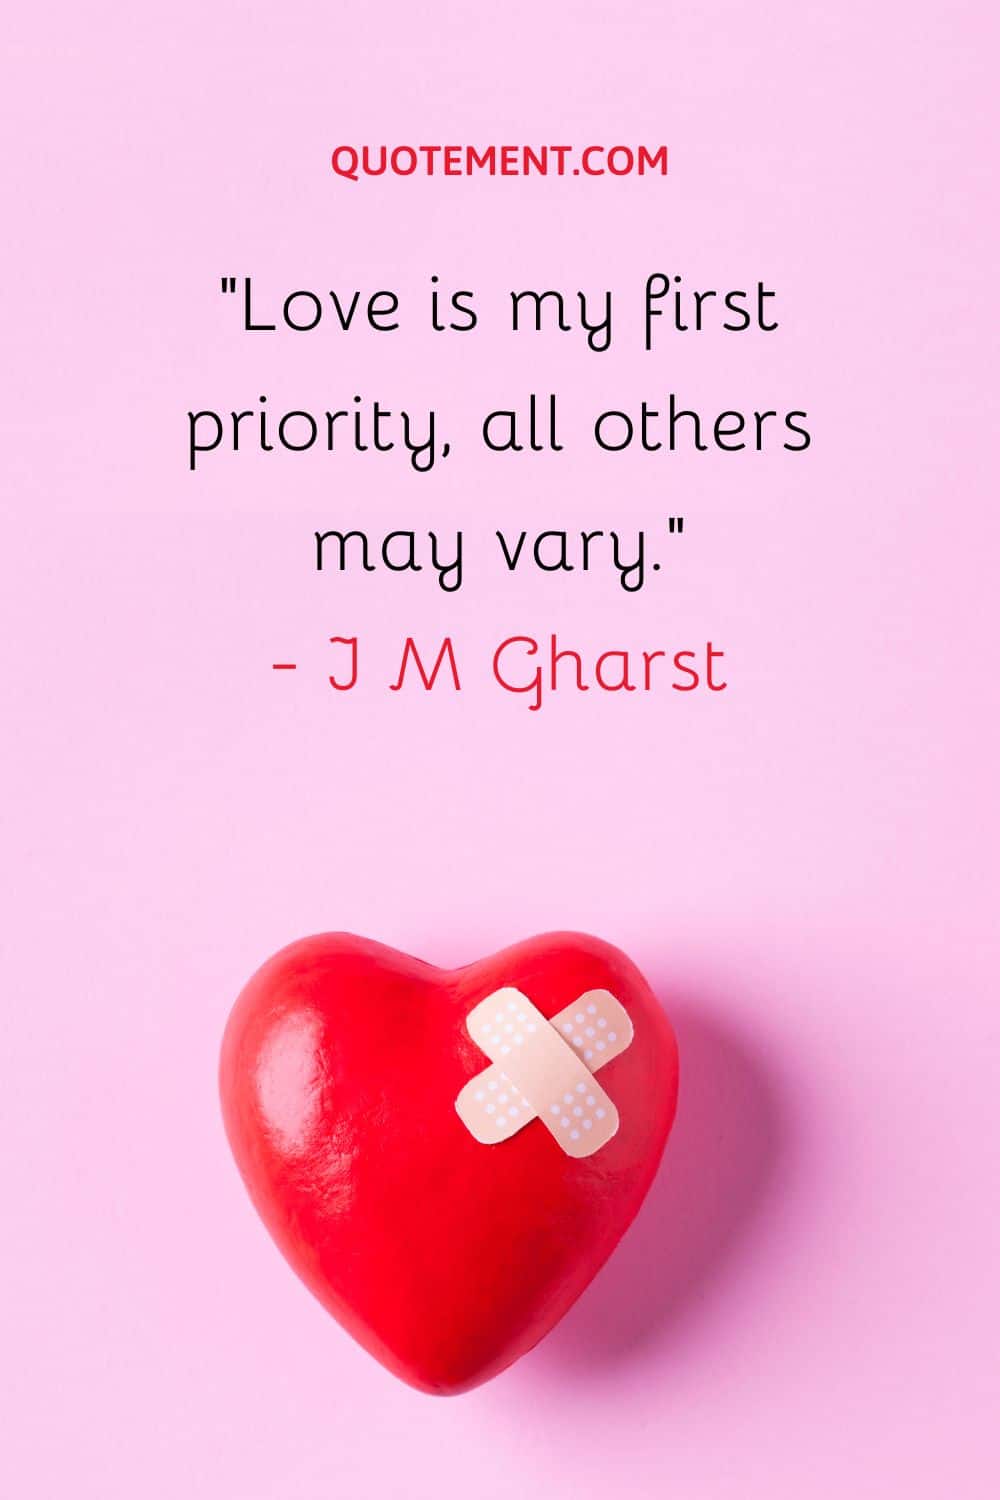 Love is my first priority, all others may vary